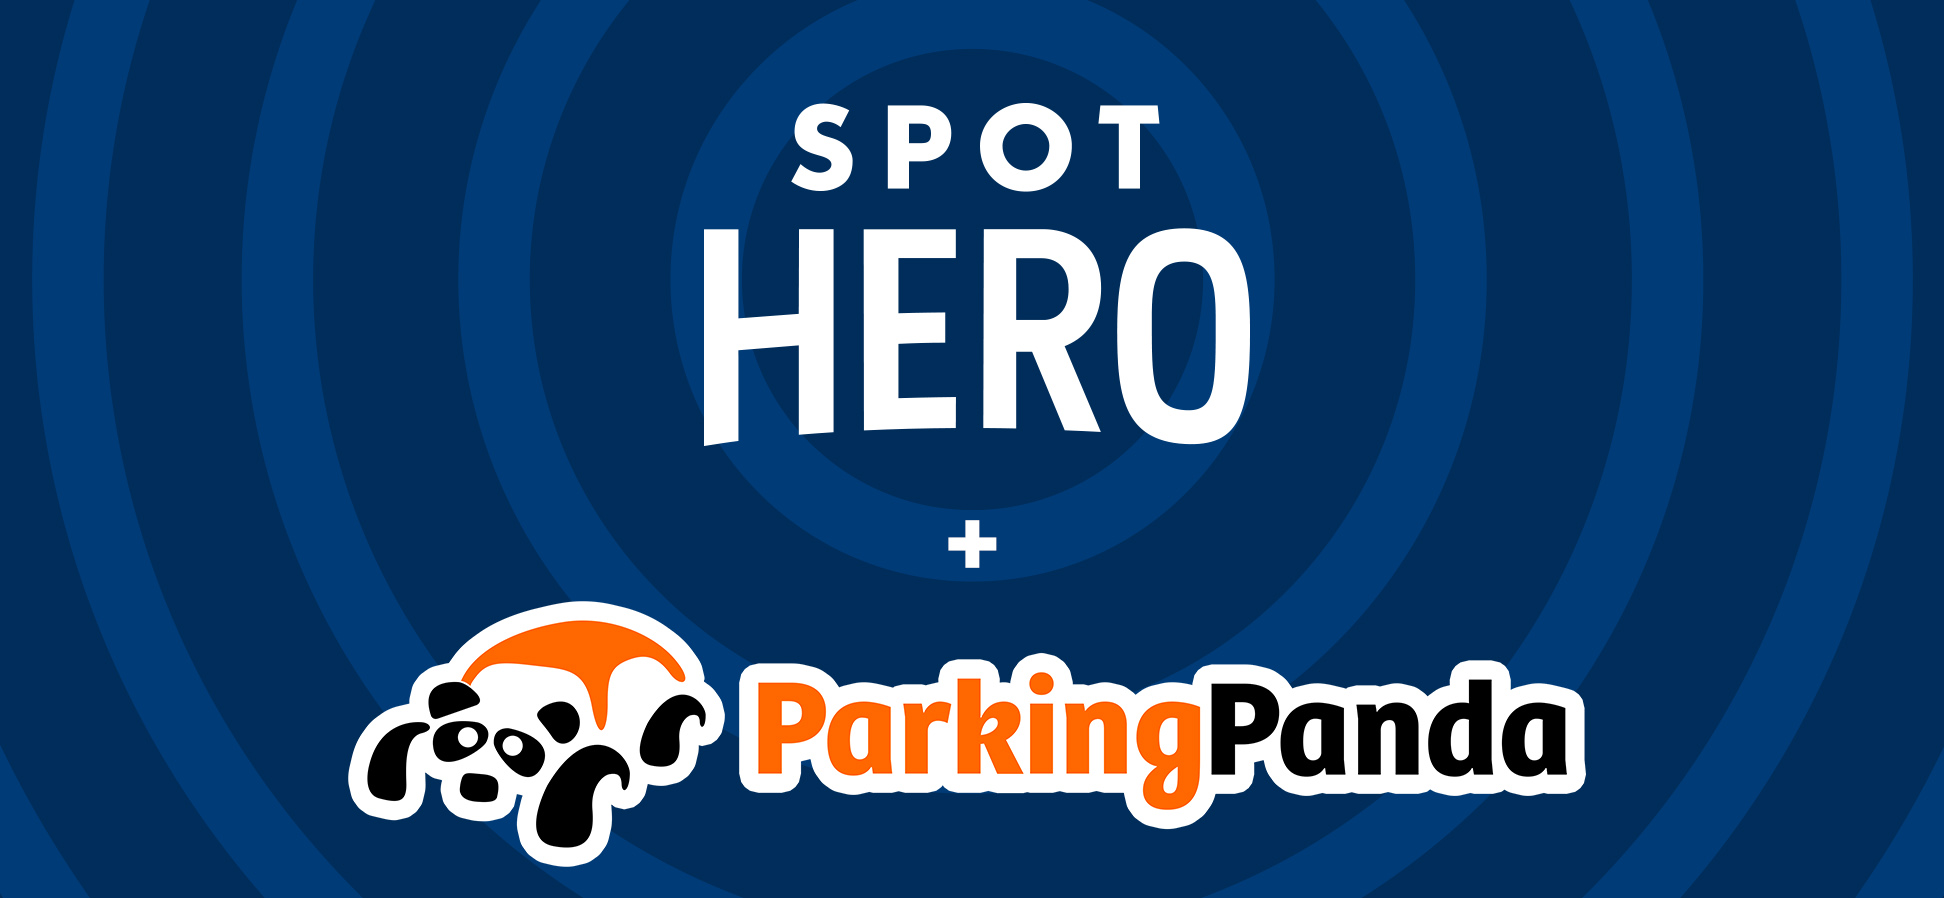 SpotHero Acquires Parking Panda – A Note from SpotHero’s Founder & CEO